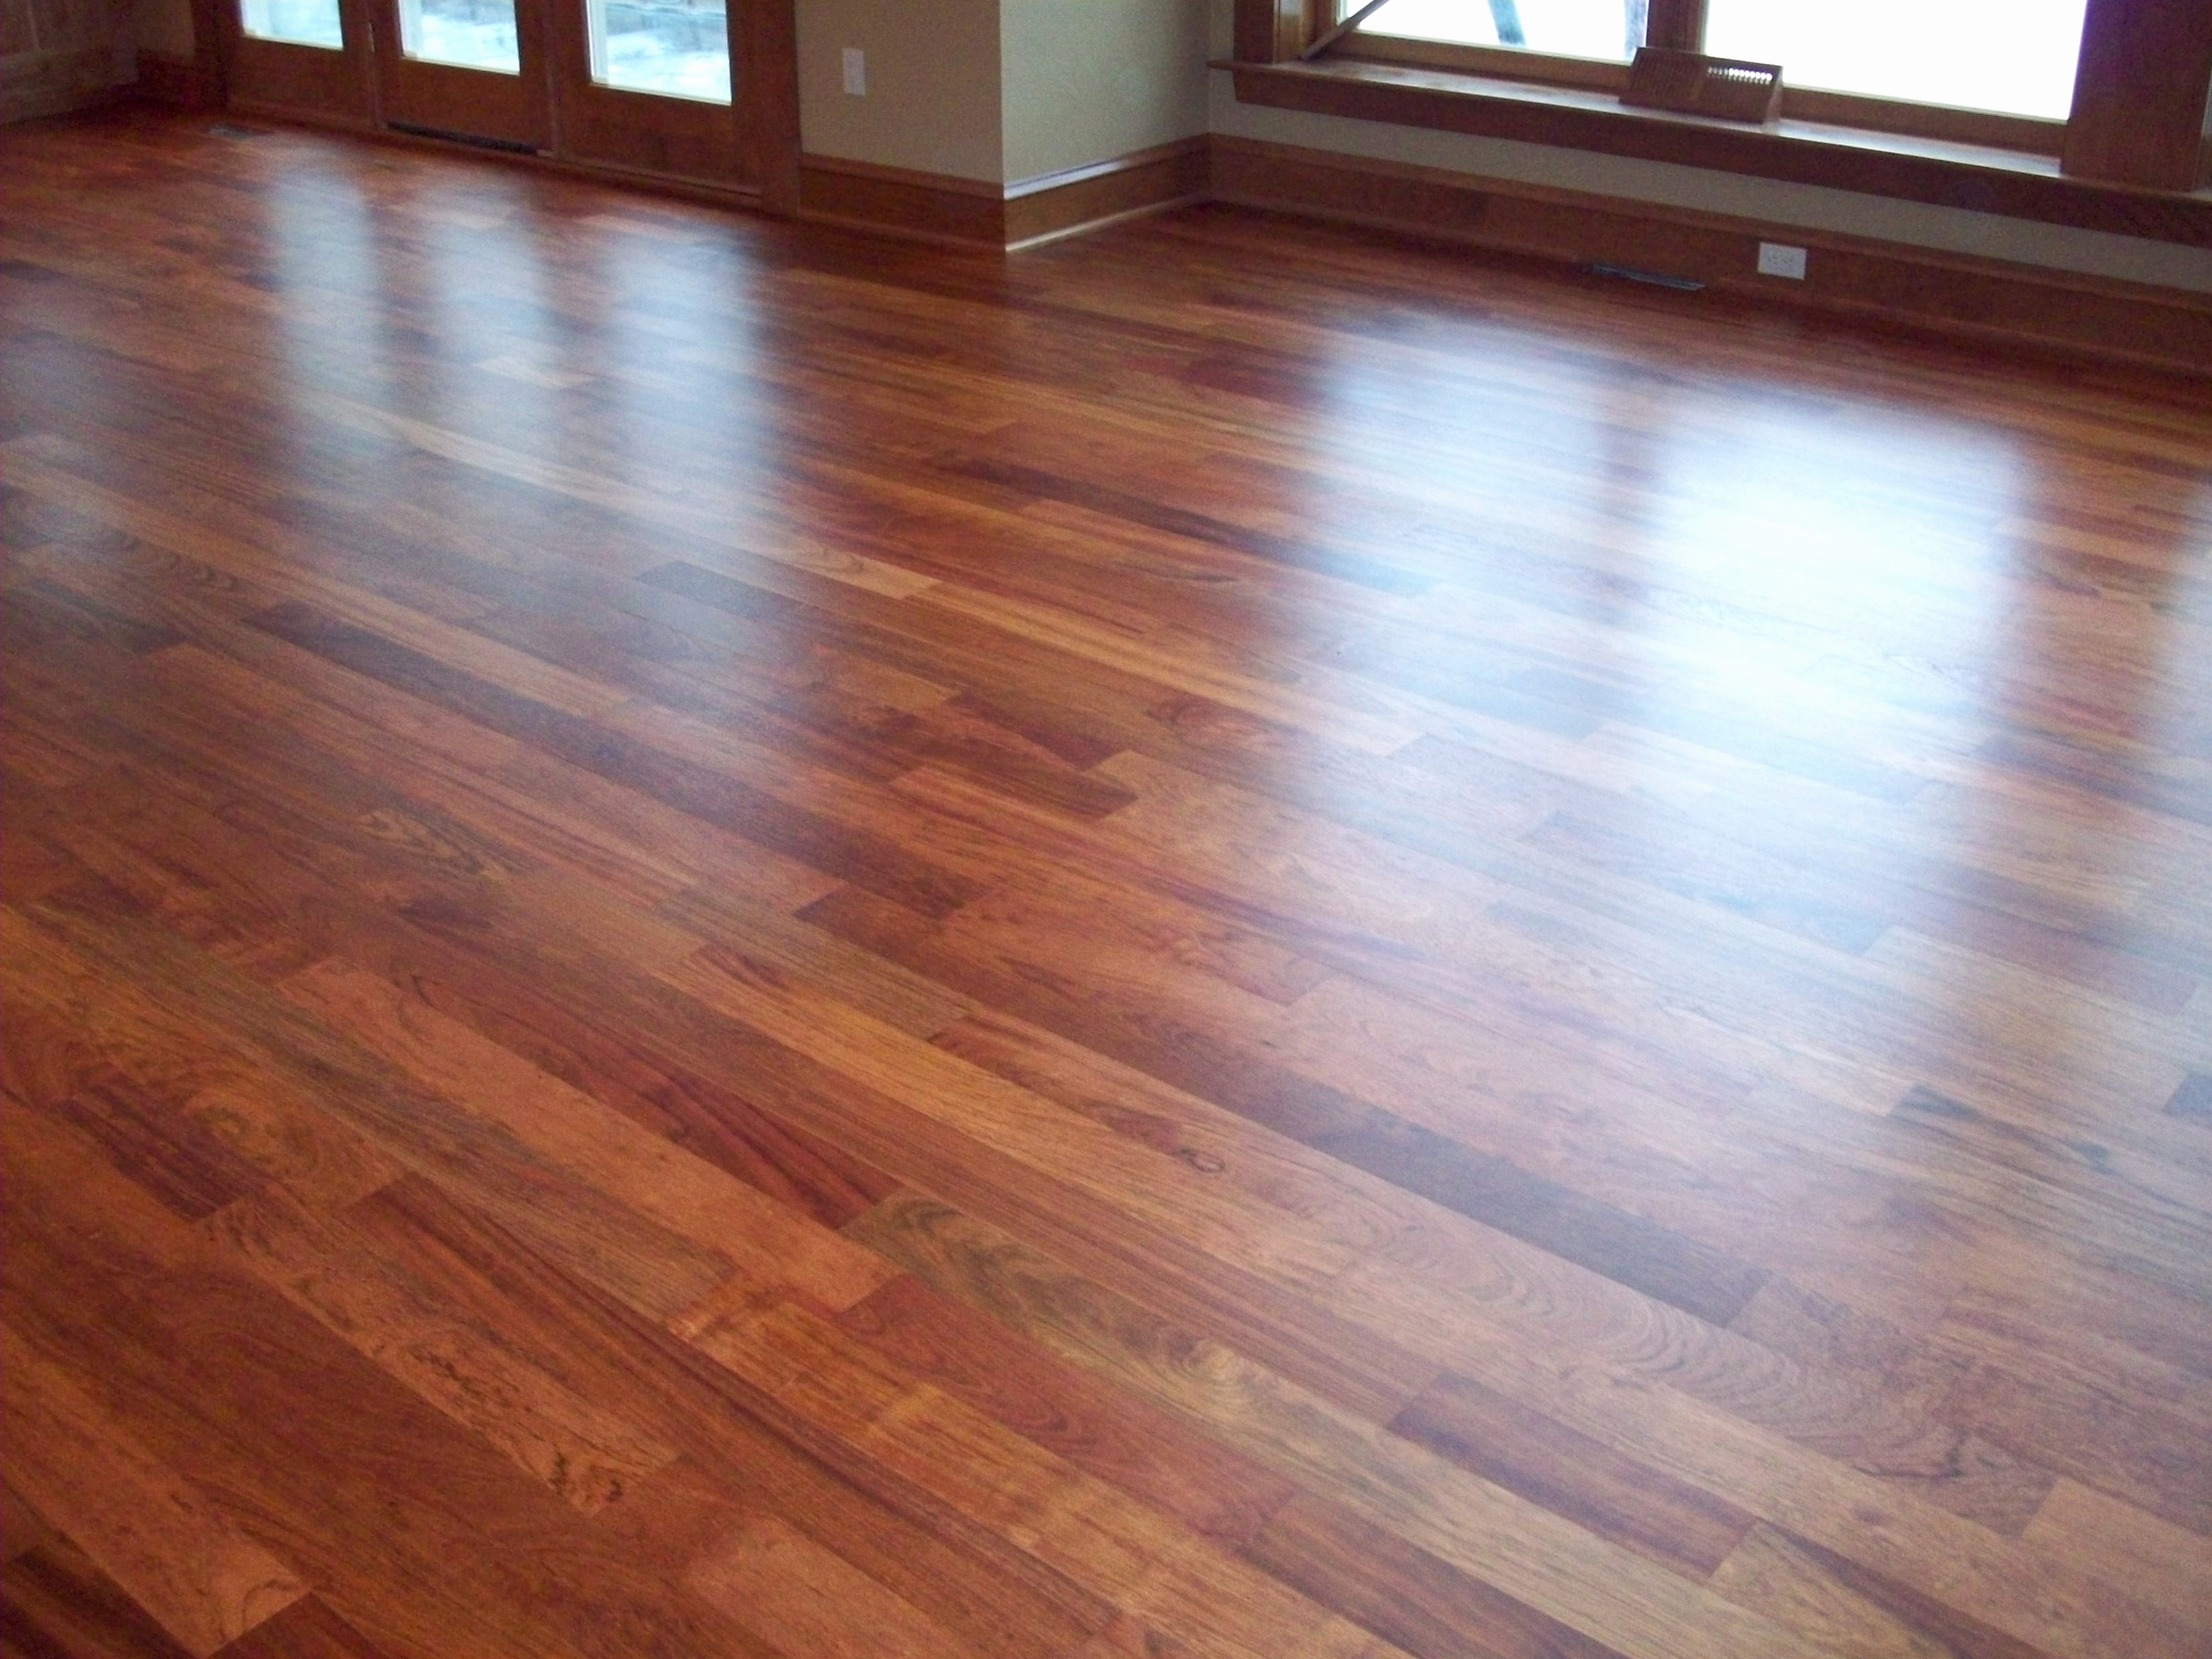 28 Recommended Hardwood Floor Maintenance 2024 free download hardwood floor maintenance of laminate wood floor cleaner best of refinishing hardwood floors pertaining to laminate wood floor cleaner photo of engaging discount hardwood flooring 5 where t